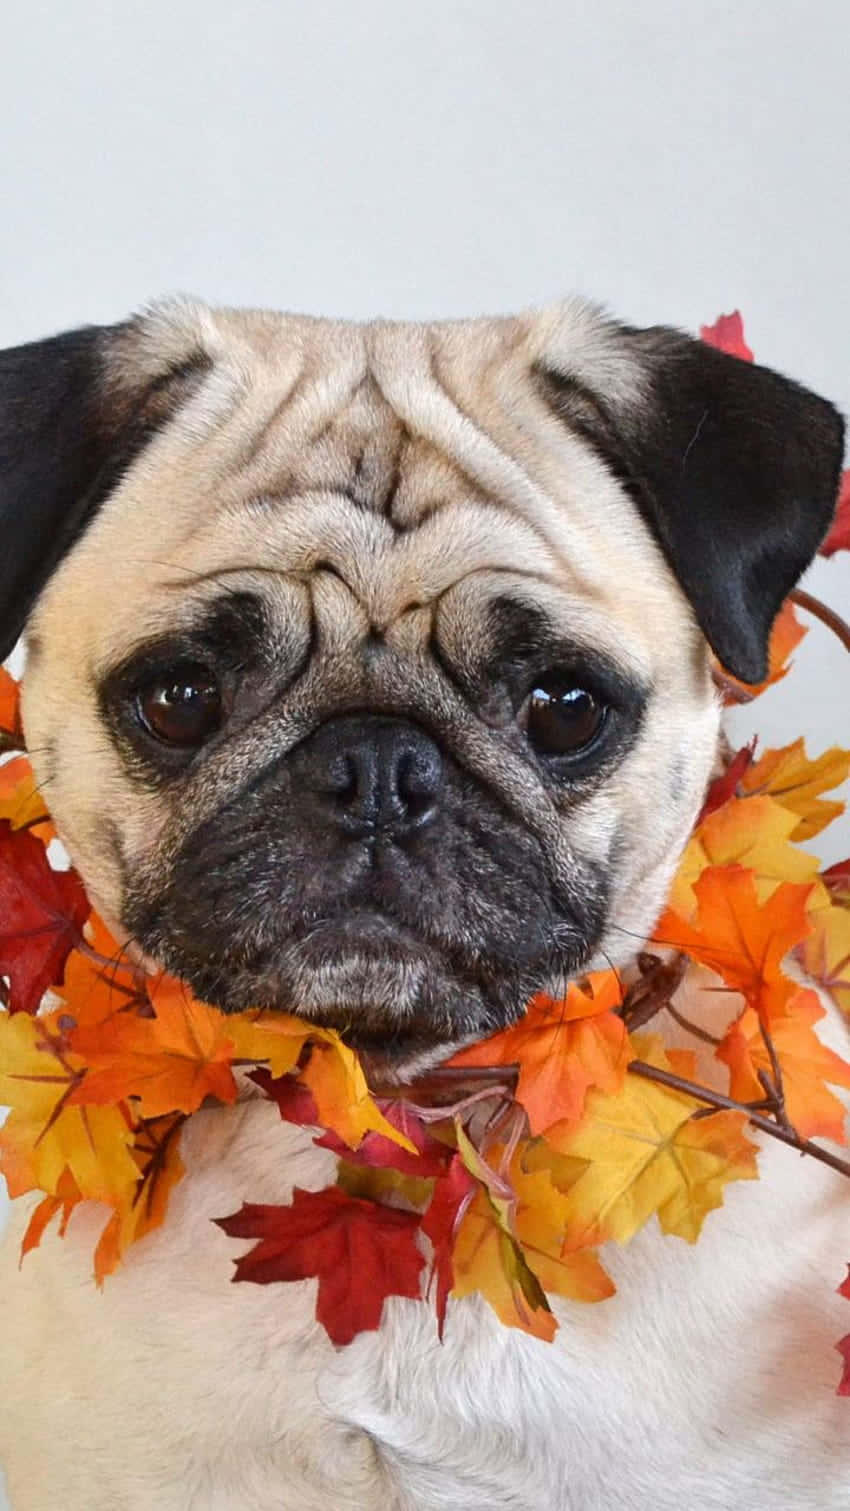 Cute Pug Wearing Maple Leaves Necklace Wallpaper